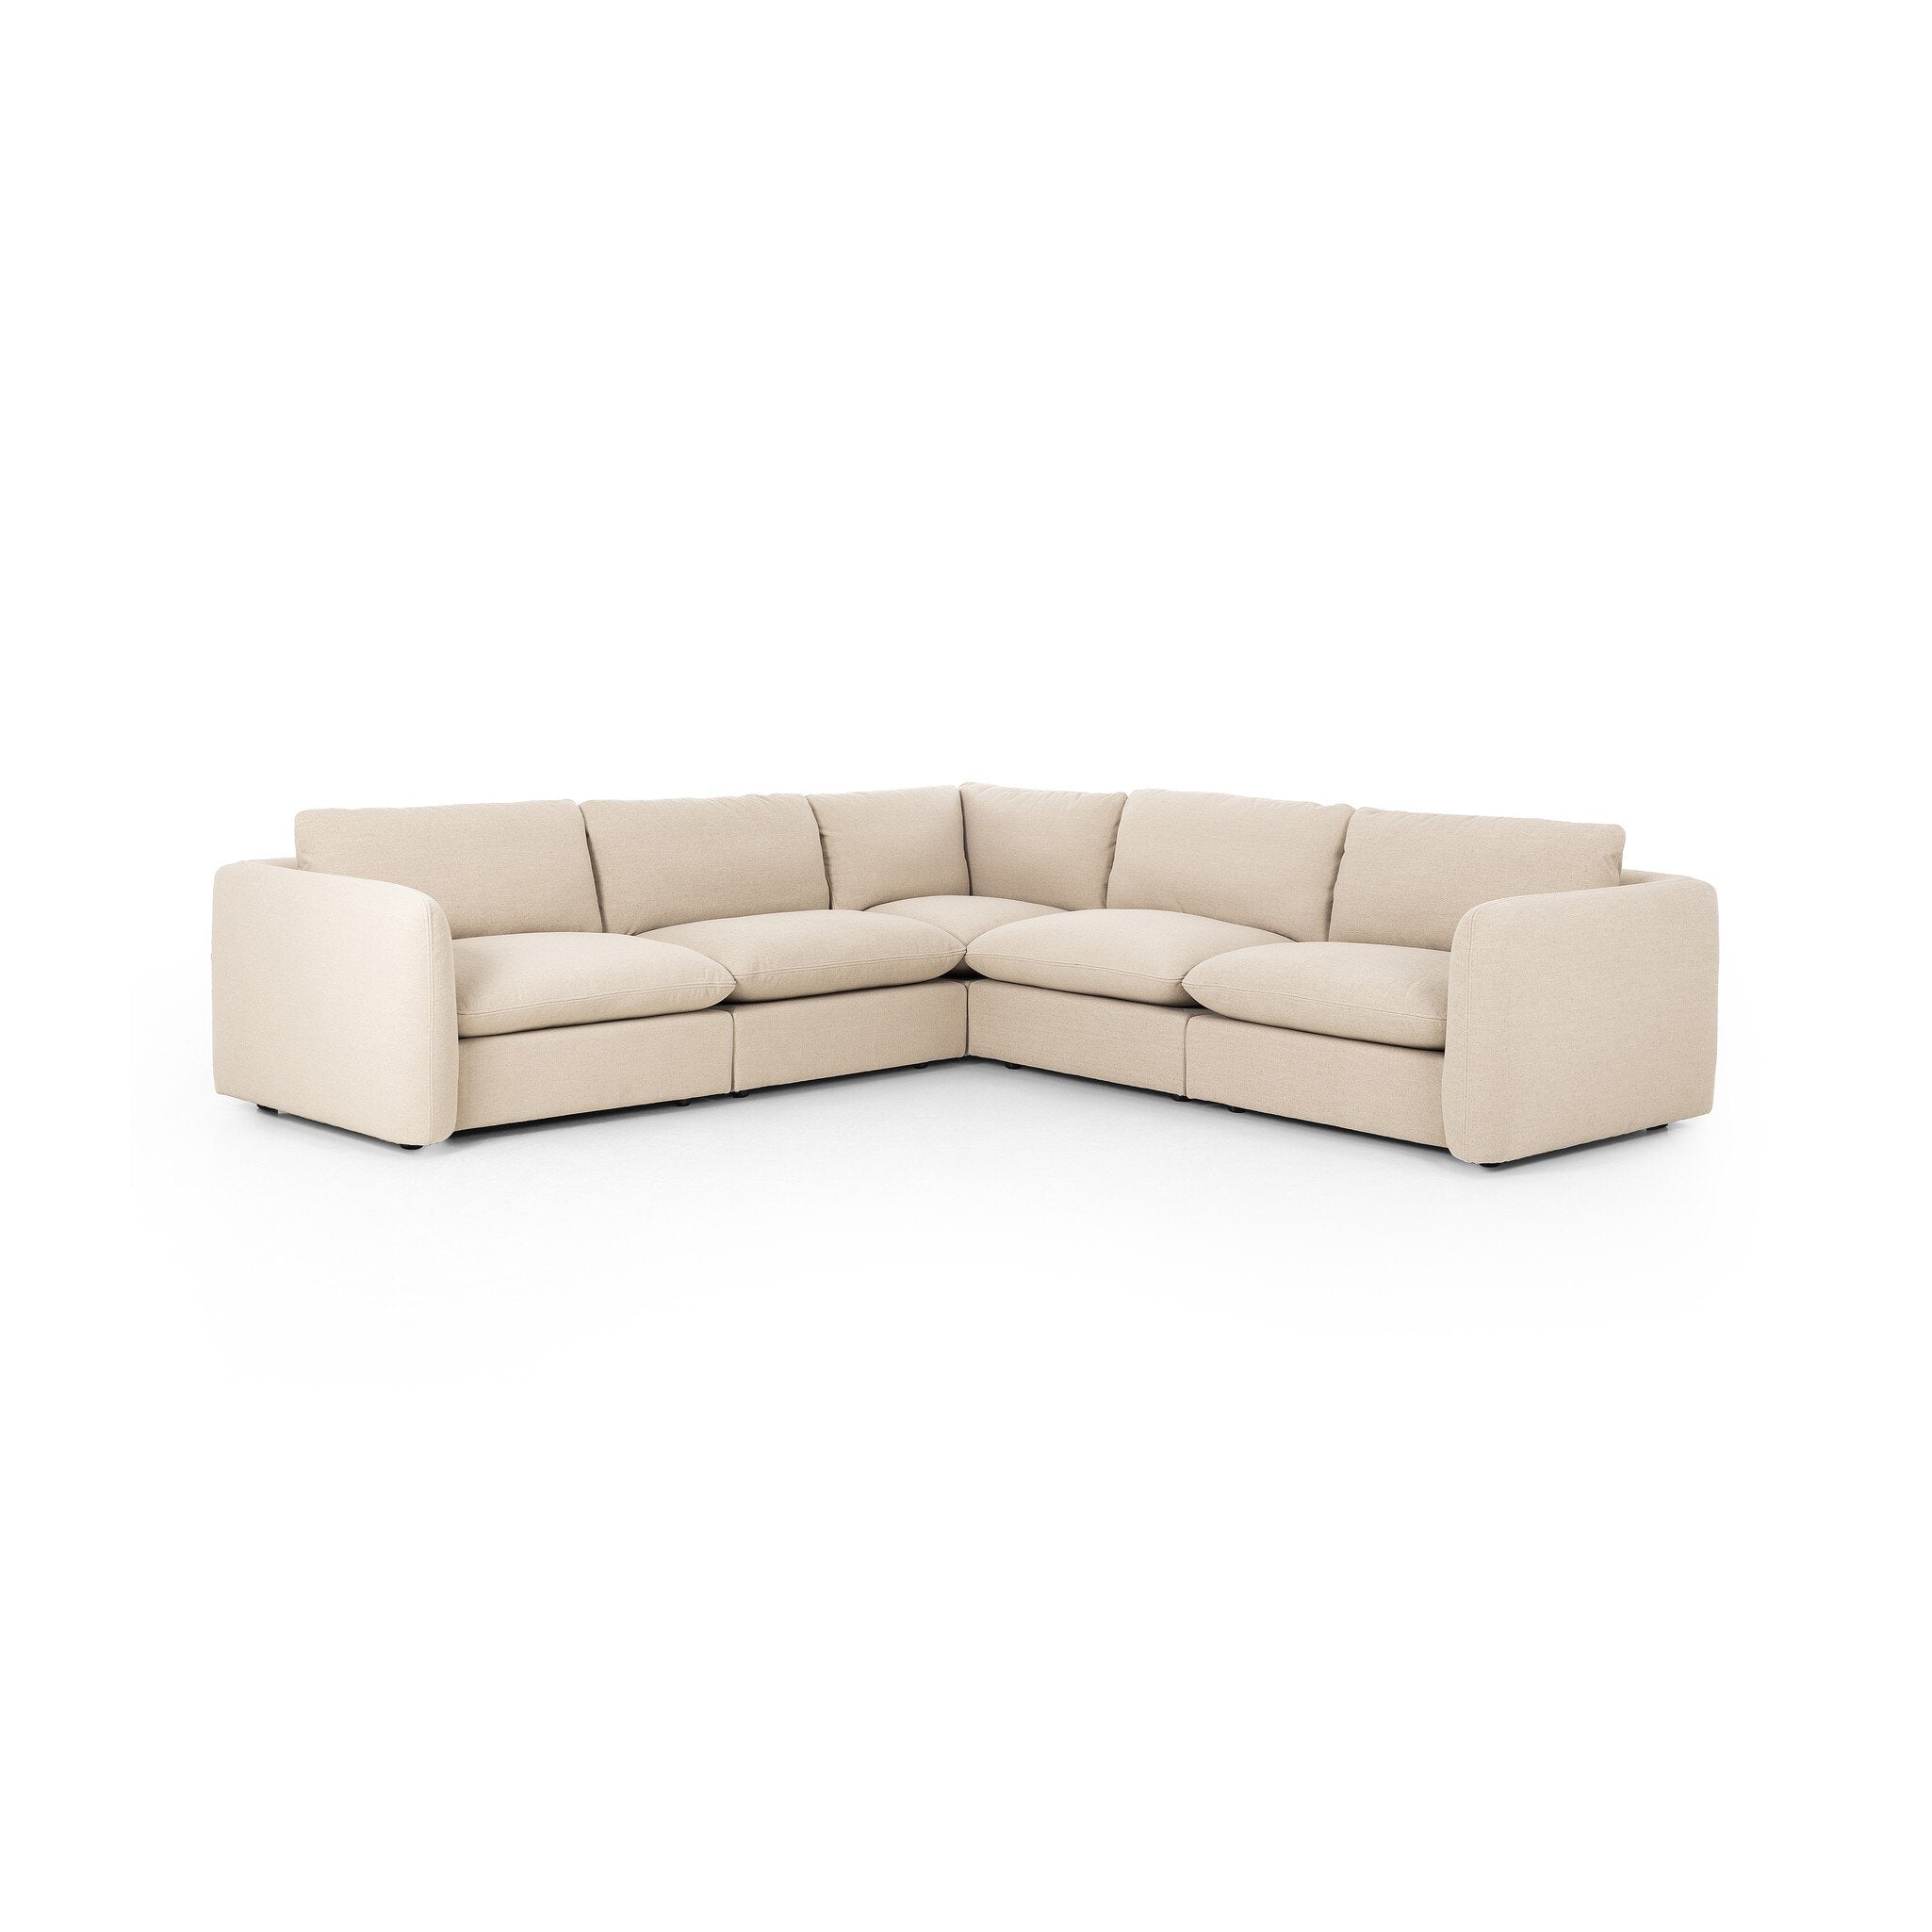 Ingel 5-Piece Sectional - Antwerp Taupe